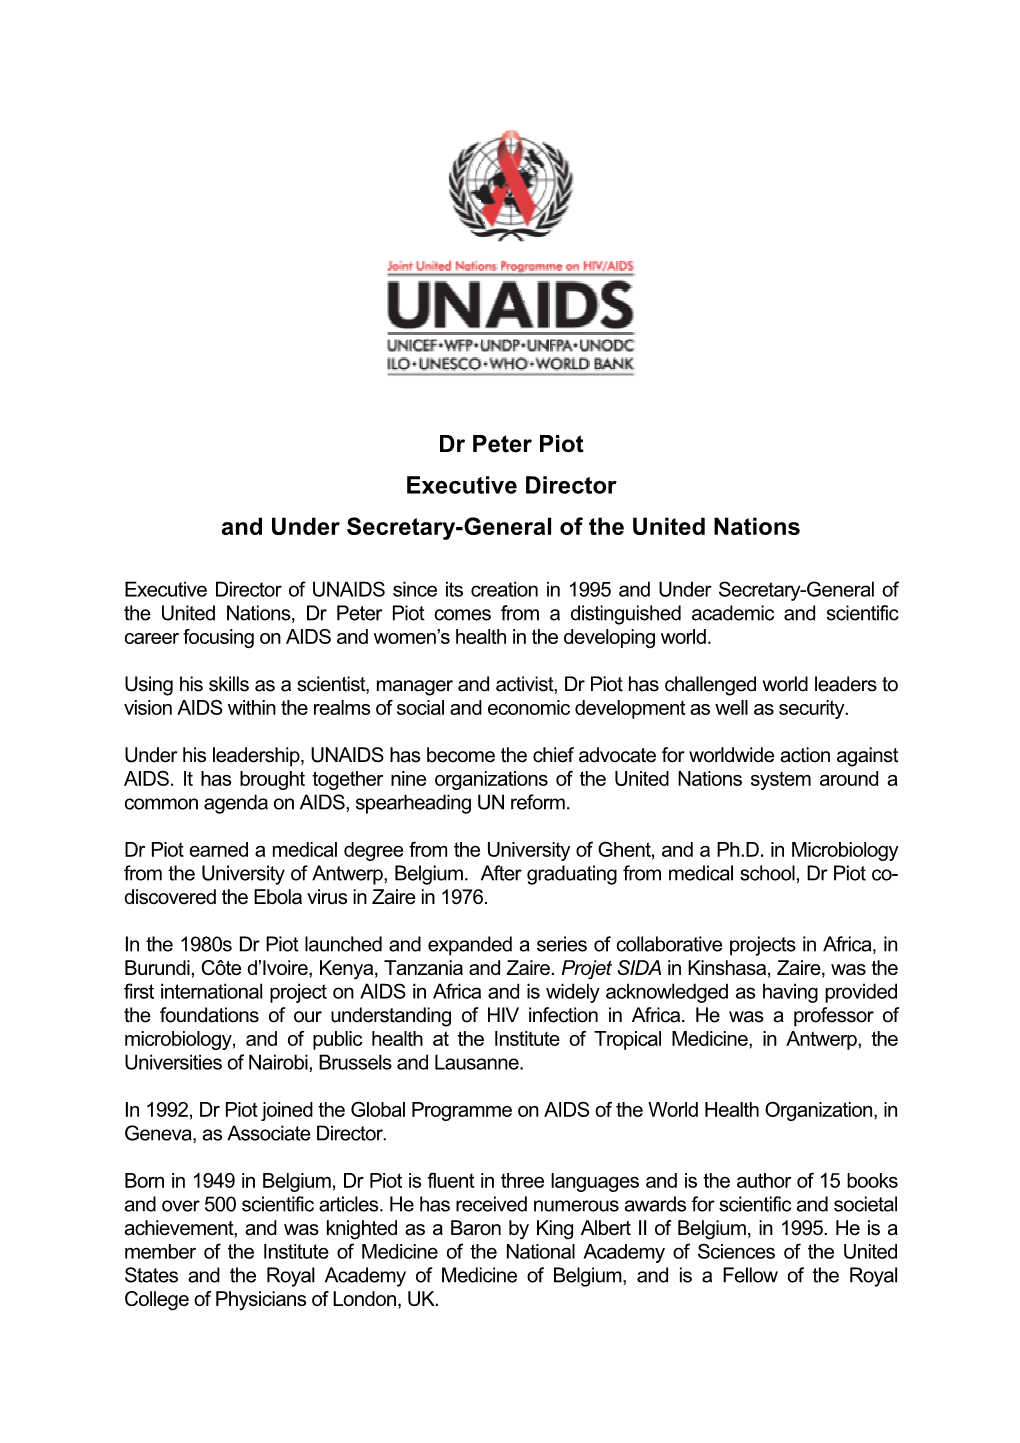 Dr Peter Piot Executive Director and Under Secretary-General of the United Nations